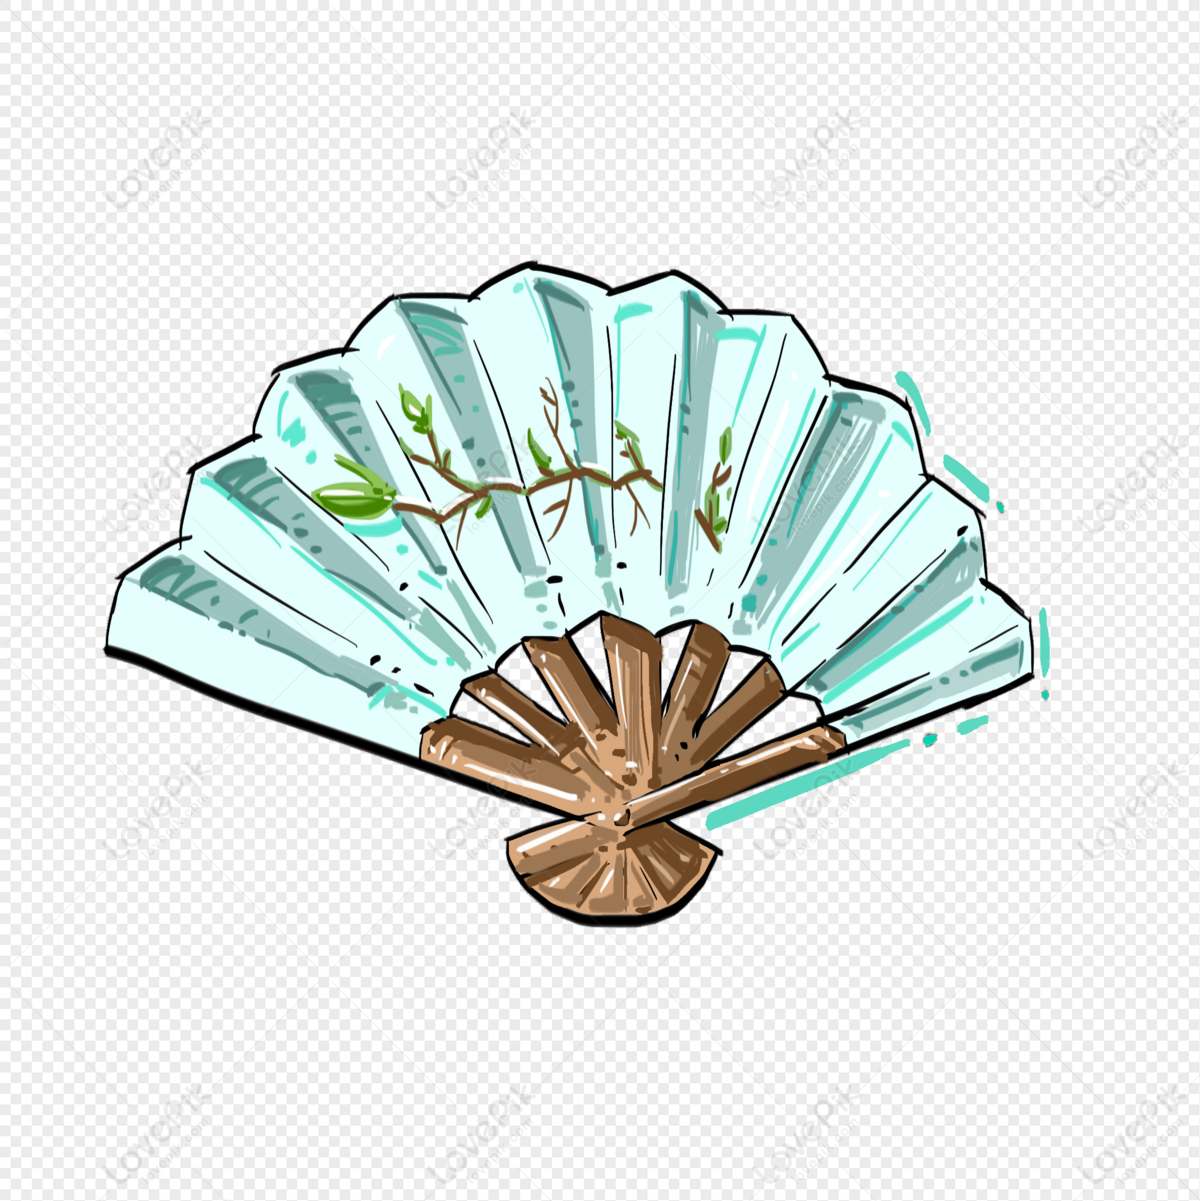 Hand Painted Chinese Fan PNG Image Free Download And Clipart Image For Free  Download - Lovepik | 401314681